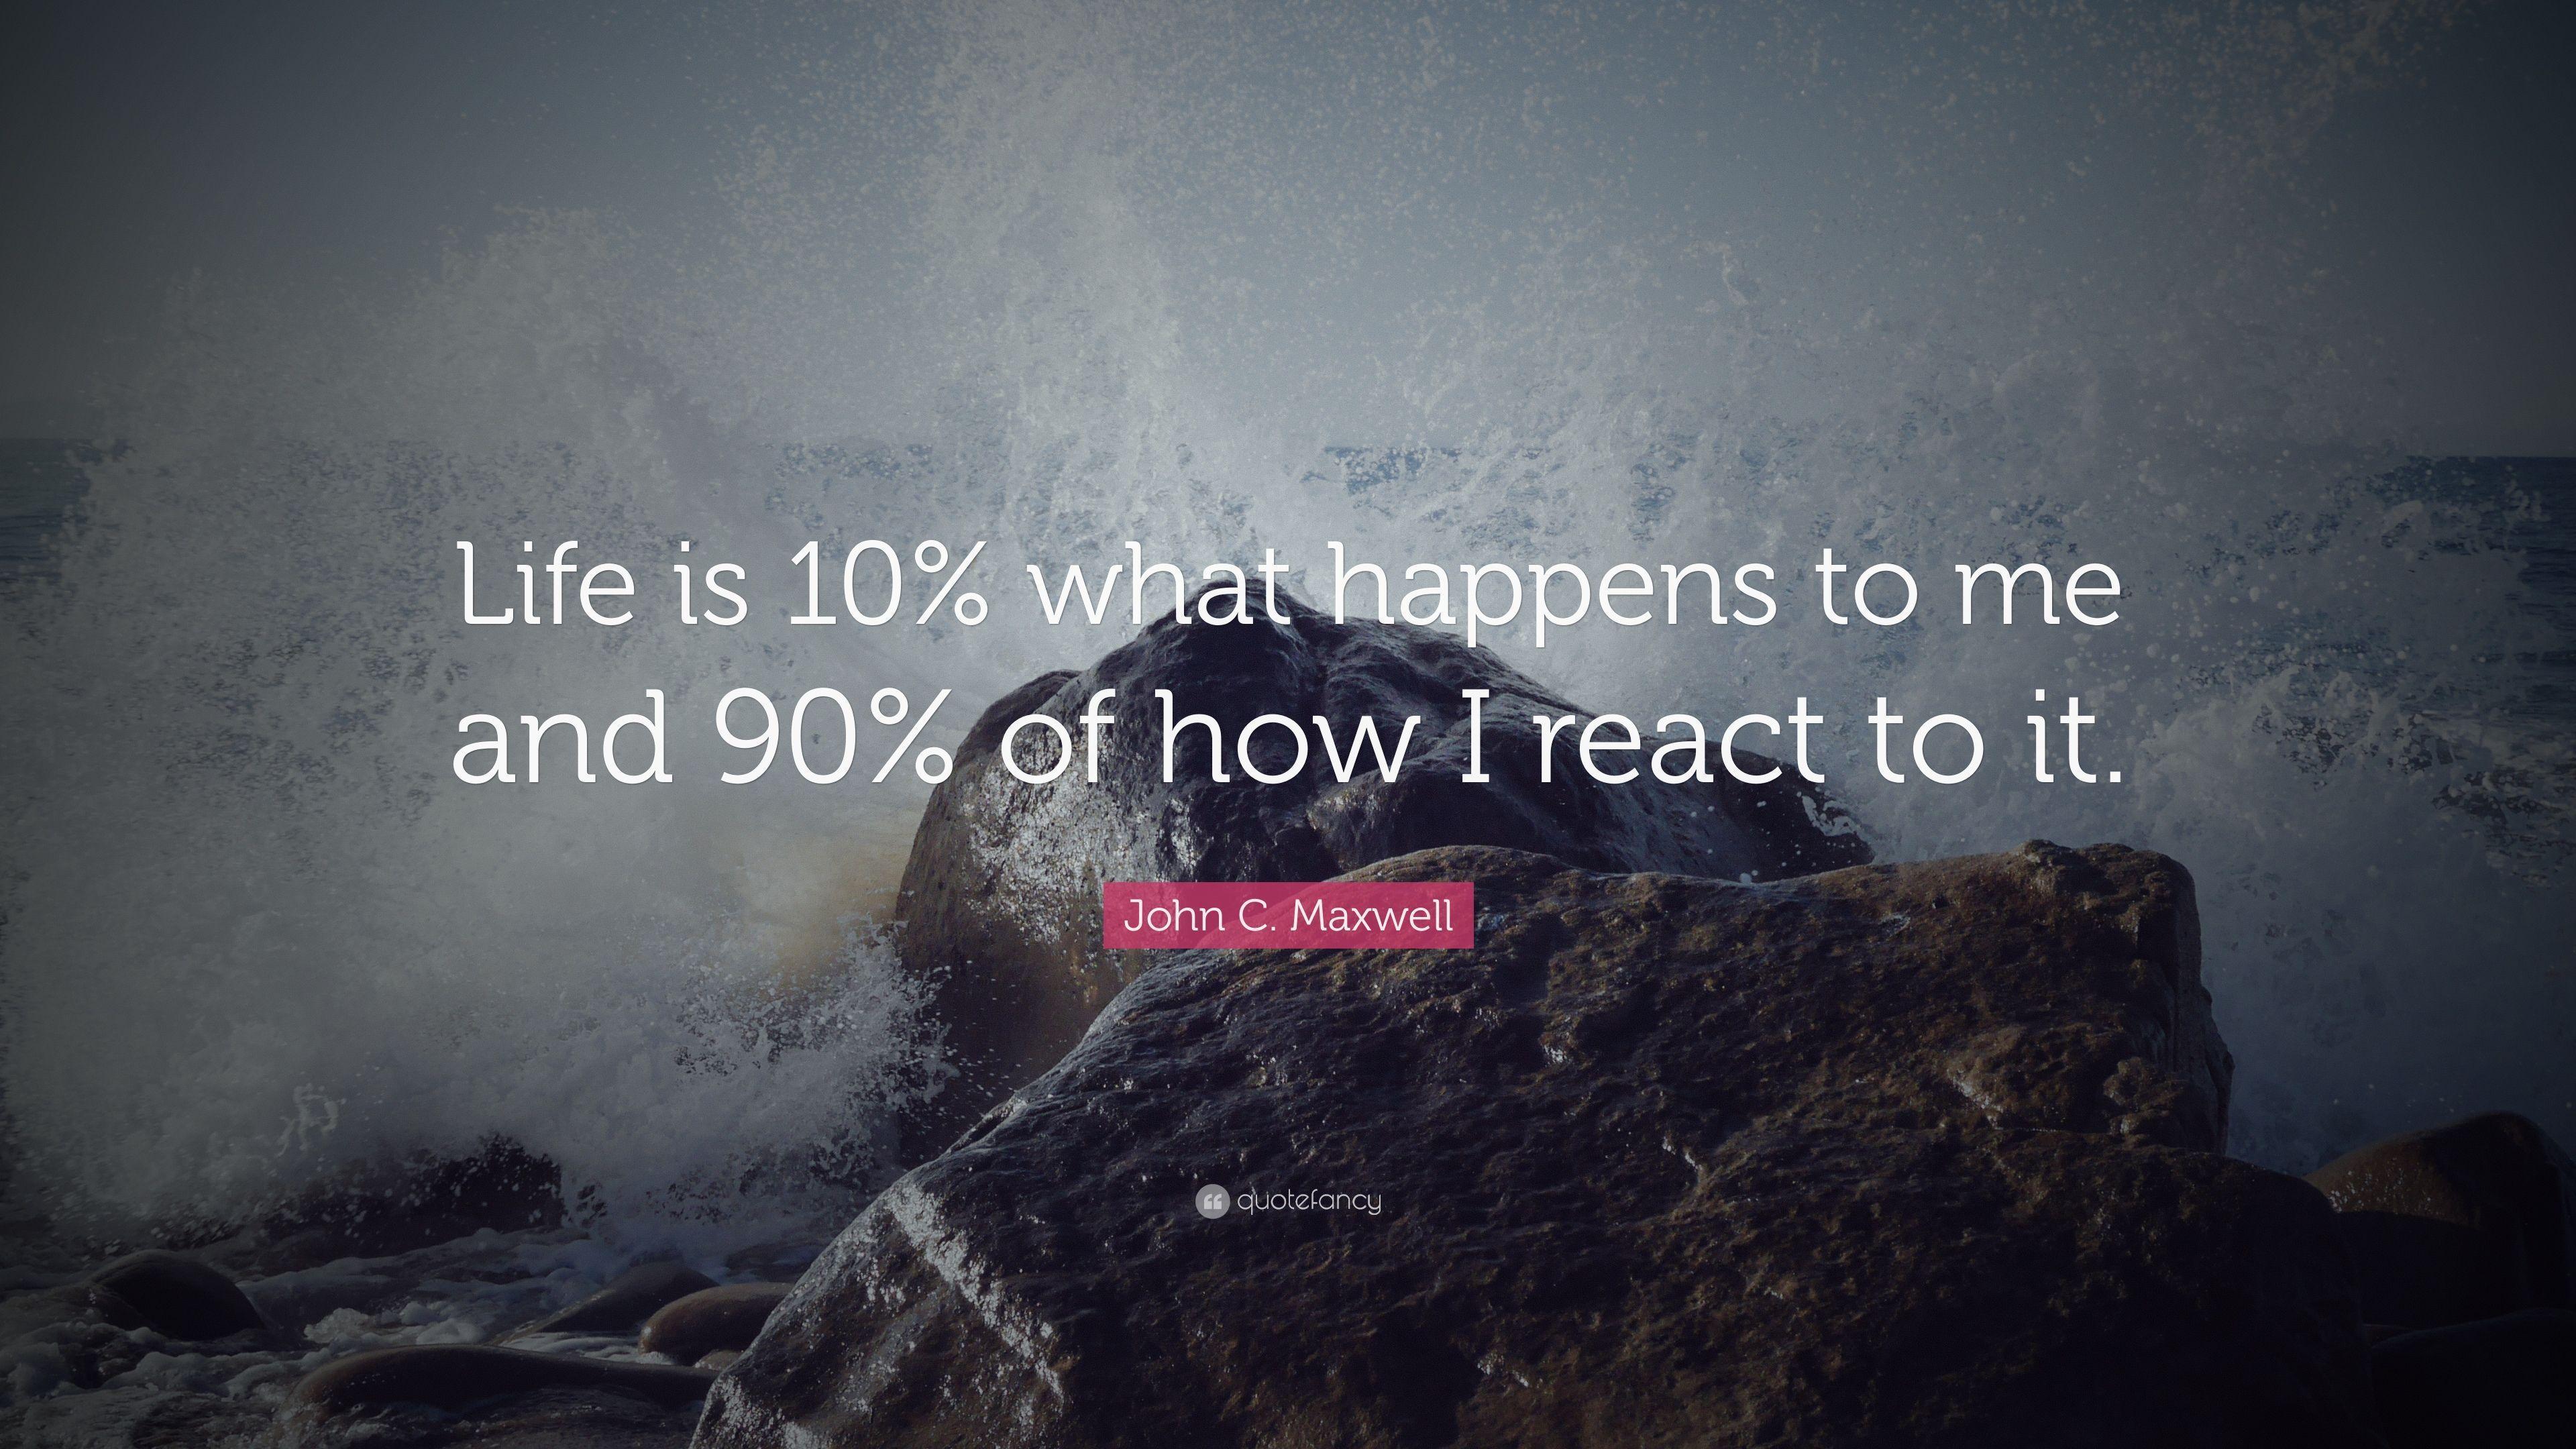 John C. Maxwell Quote: “Life is 10% what happens to me